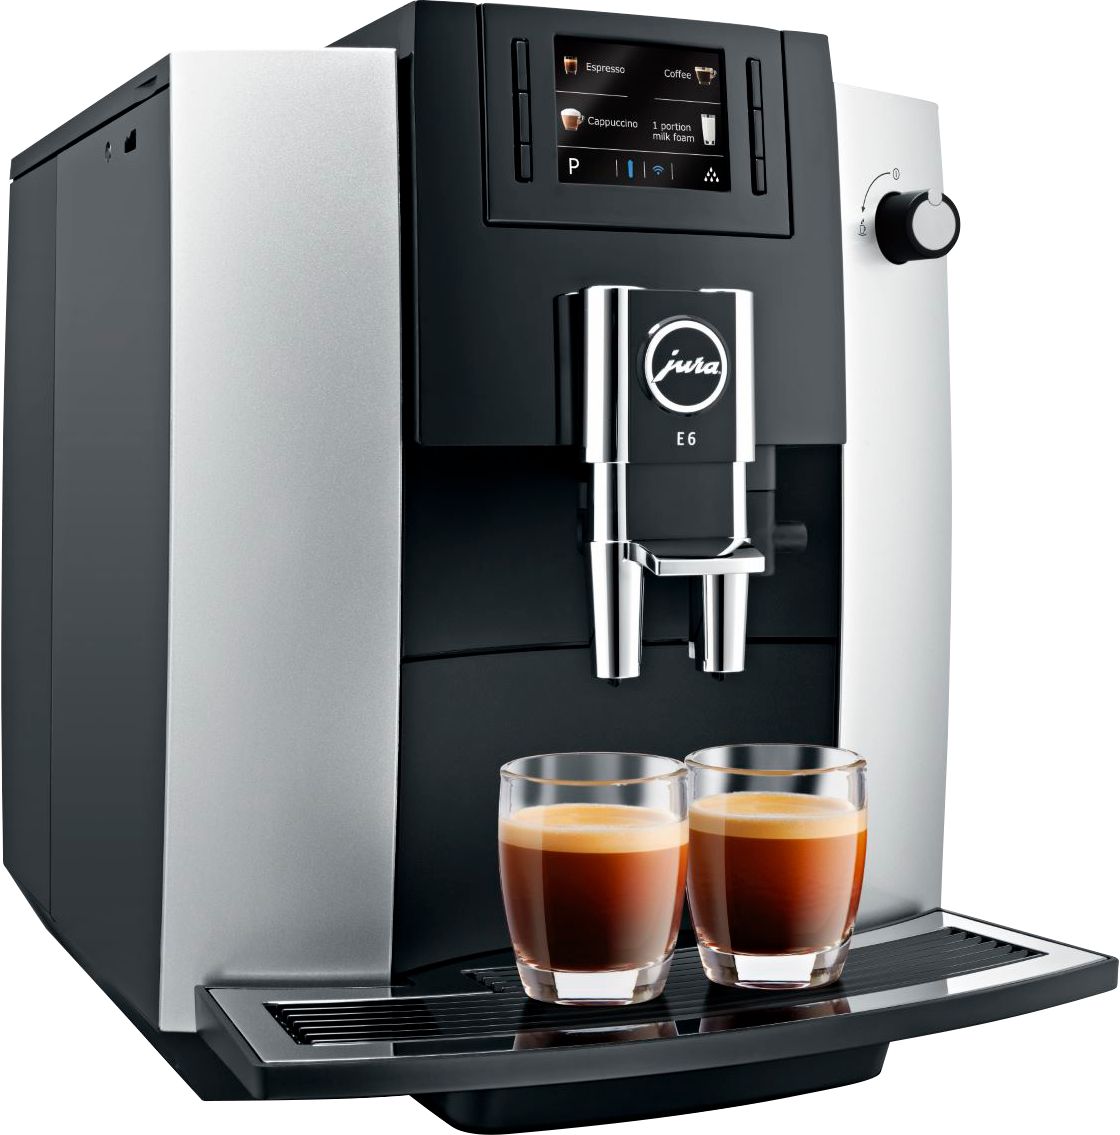 Left View: GE Profile - Semi-Automatic Espresso Machine with 15 bars of pressure, Milk Frother, and Built-In Wi-Fi - Black